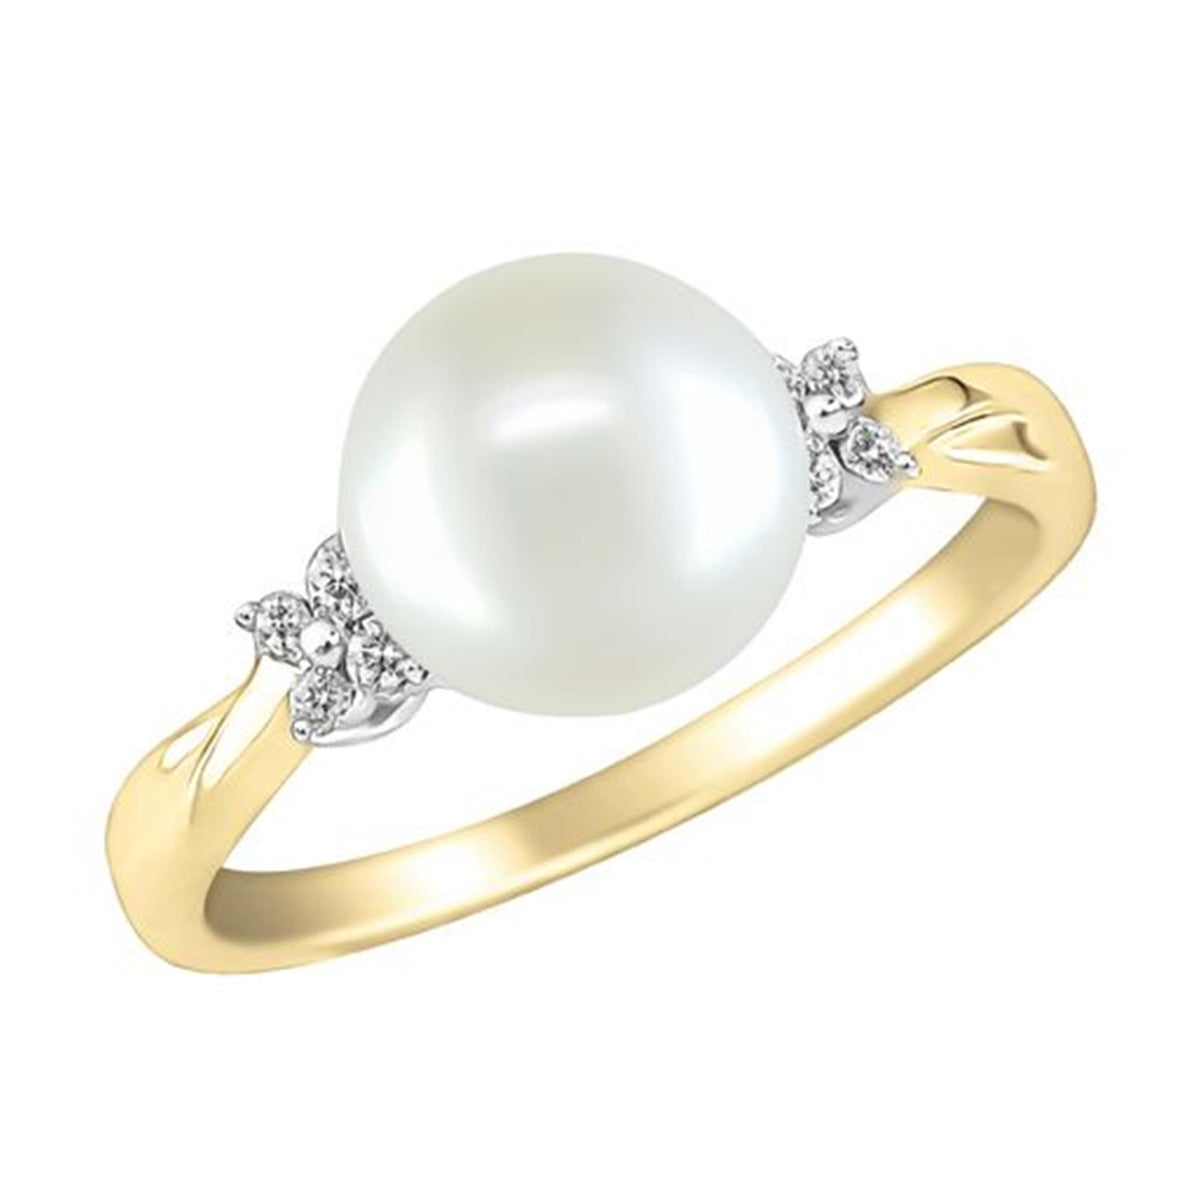 14Kt Yellow & White Gold Ring With 7.5mm Akoya Cultured Pearl